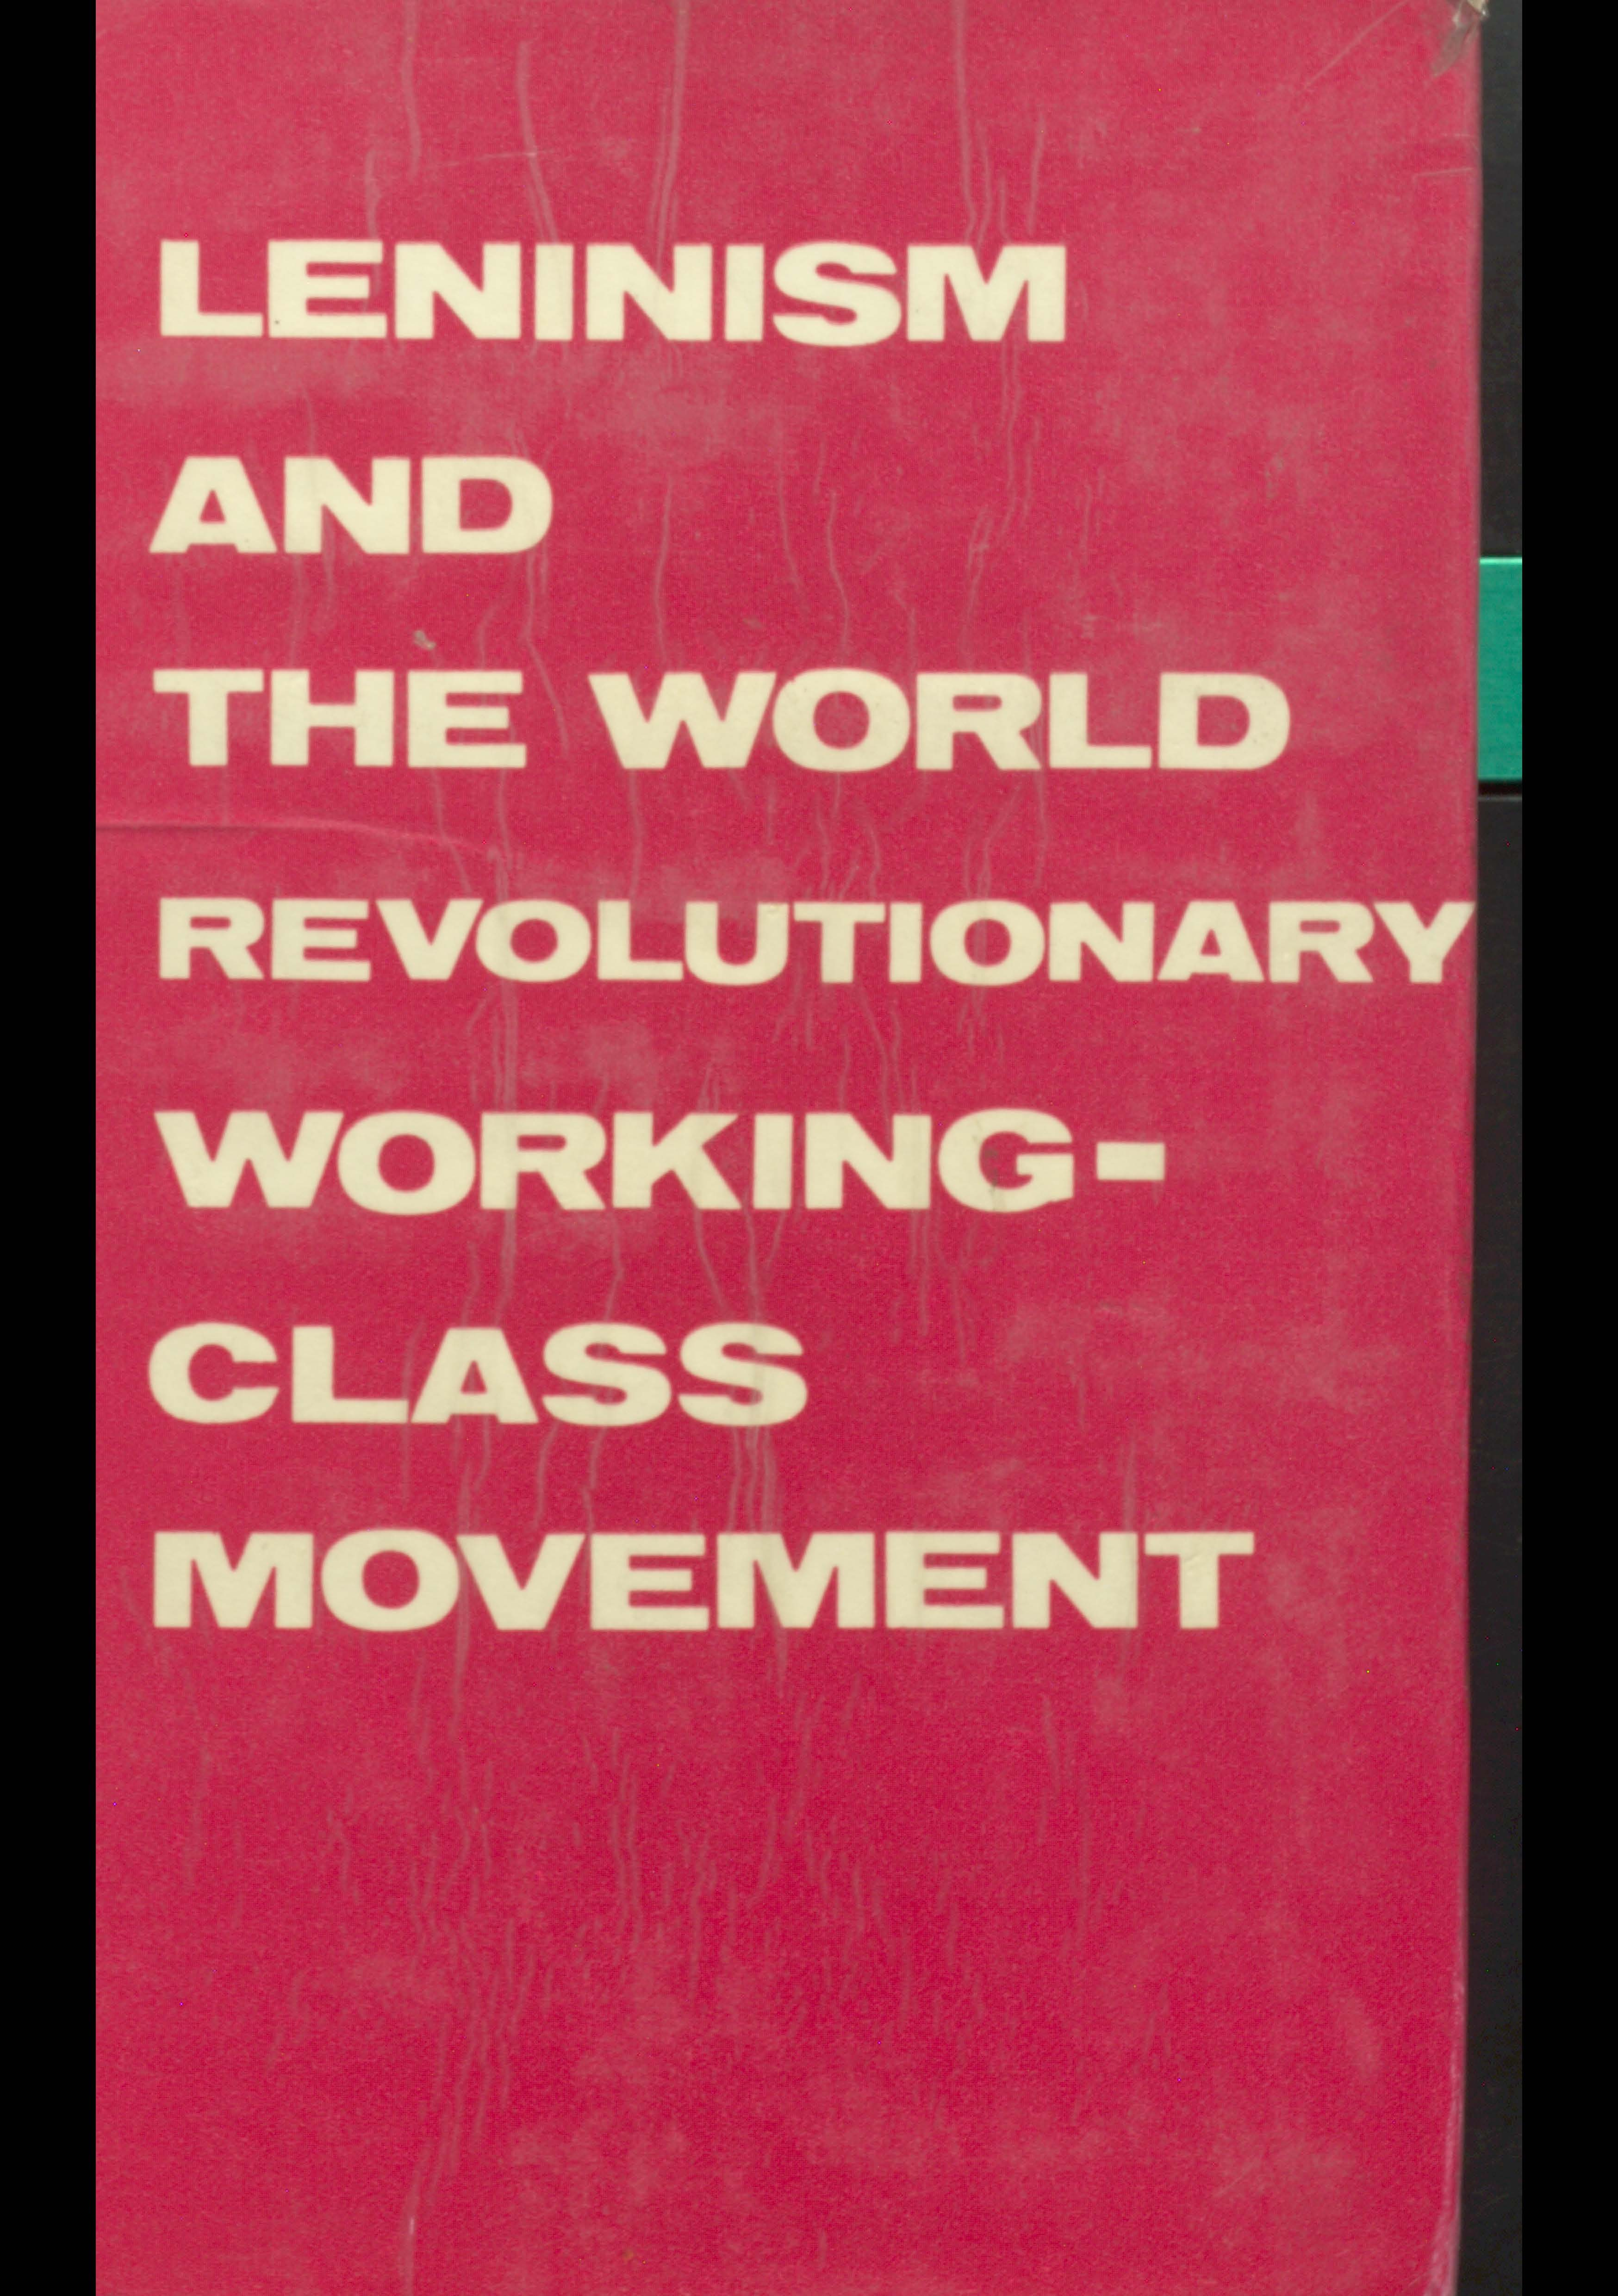 LENINISM and the world revolutinary working - class movement